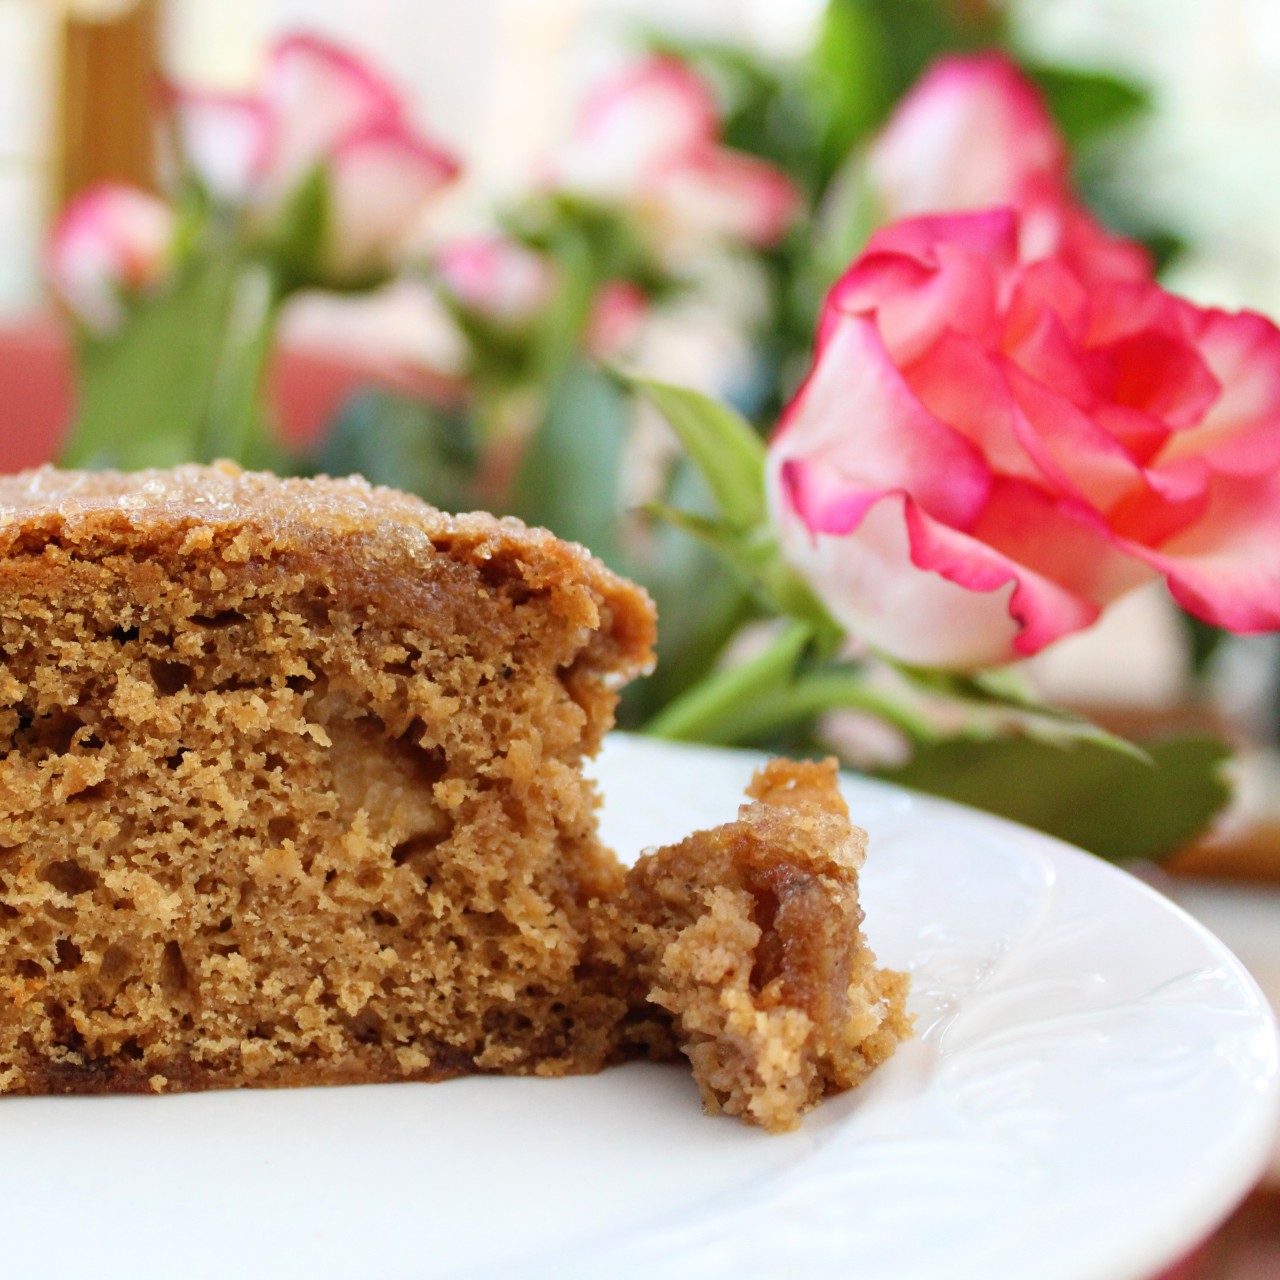 Recipe for Gingerbread Cake
Try this delicious cake by Tastes of Health. The addition of apples makes it incredibly moist.